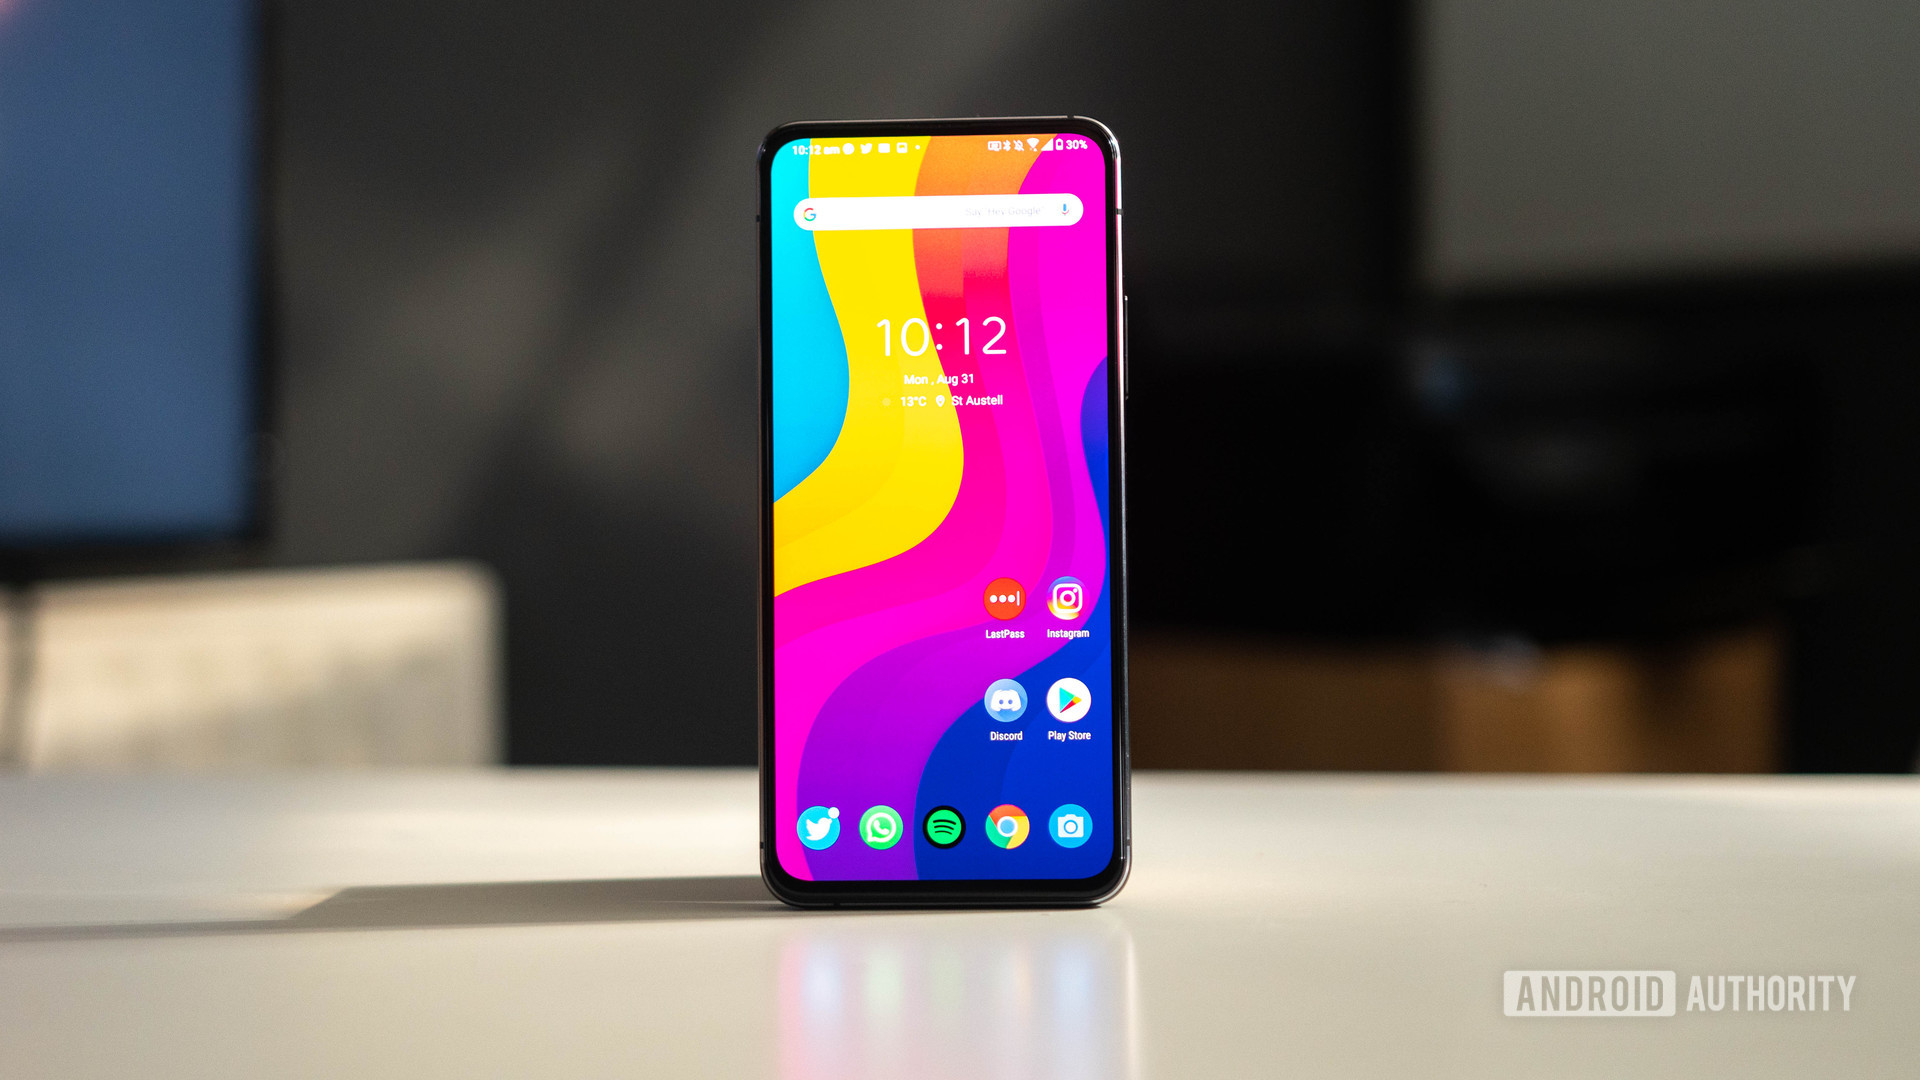 Asus Zenfone 7 Pro home screen with the phone on a table